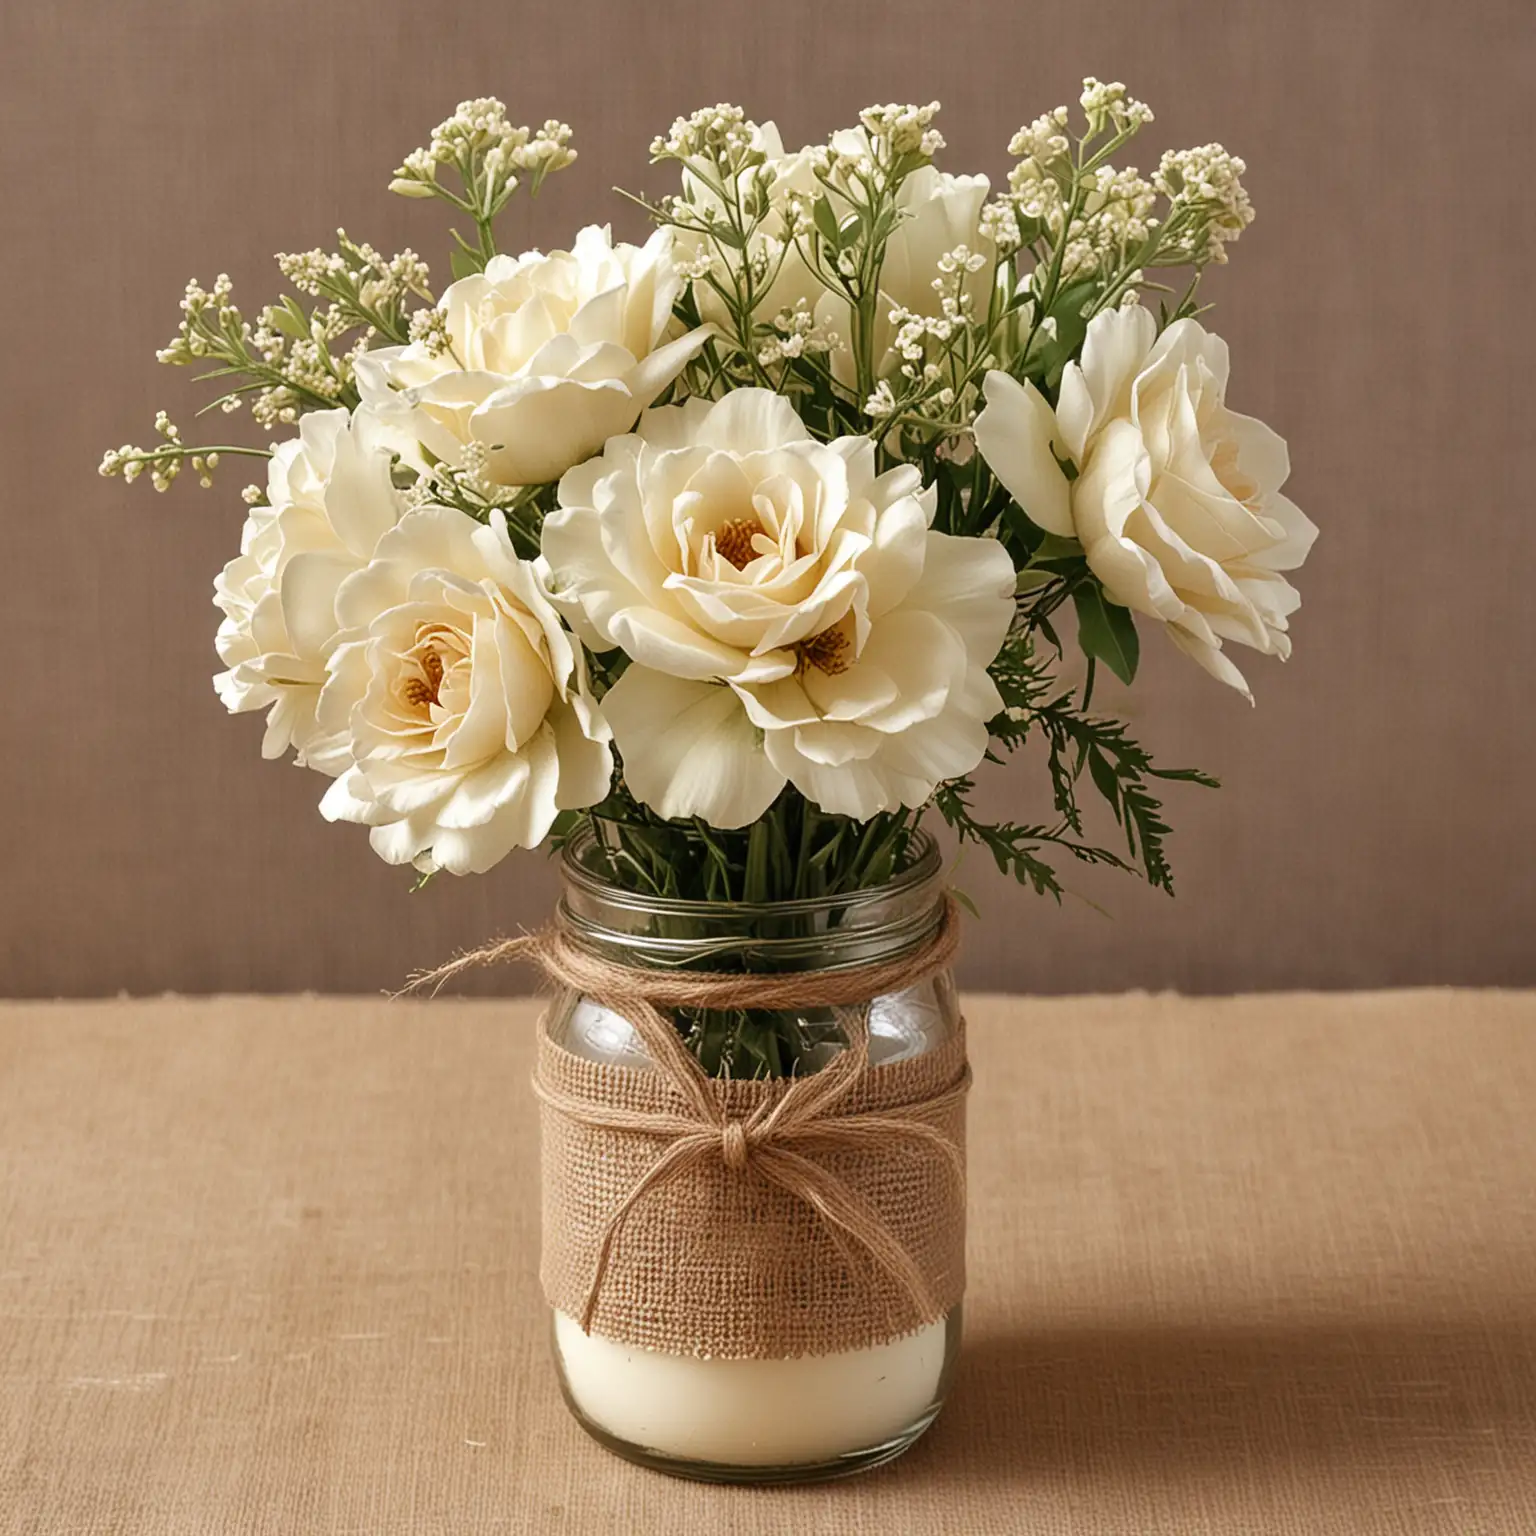 DIY-Vintage-Wedding-Table-Centerpiece-Distressed-Ivory-Jar-with-Rustic-Burlap-and-Ivory-Flowers